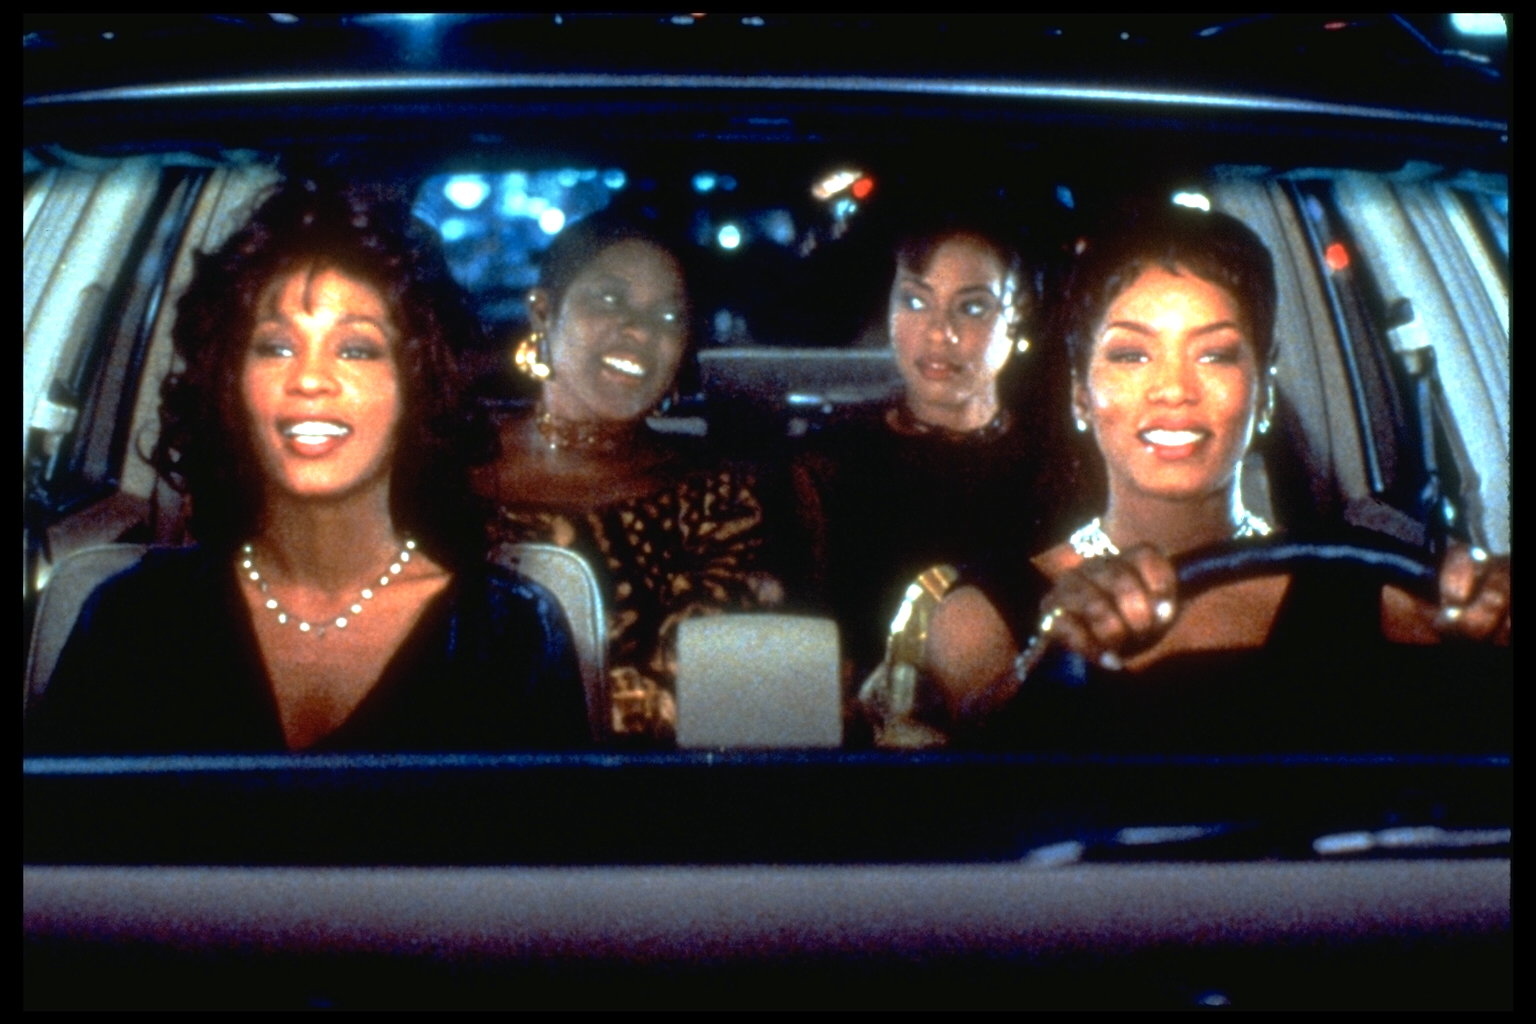 FILM 'WAITING TO EXHALE' BY FOREST WHITAKER